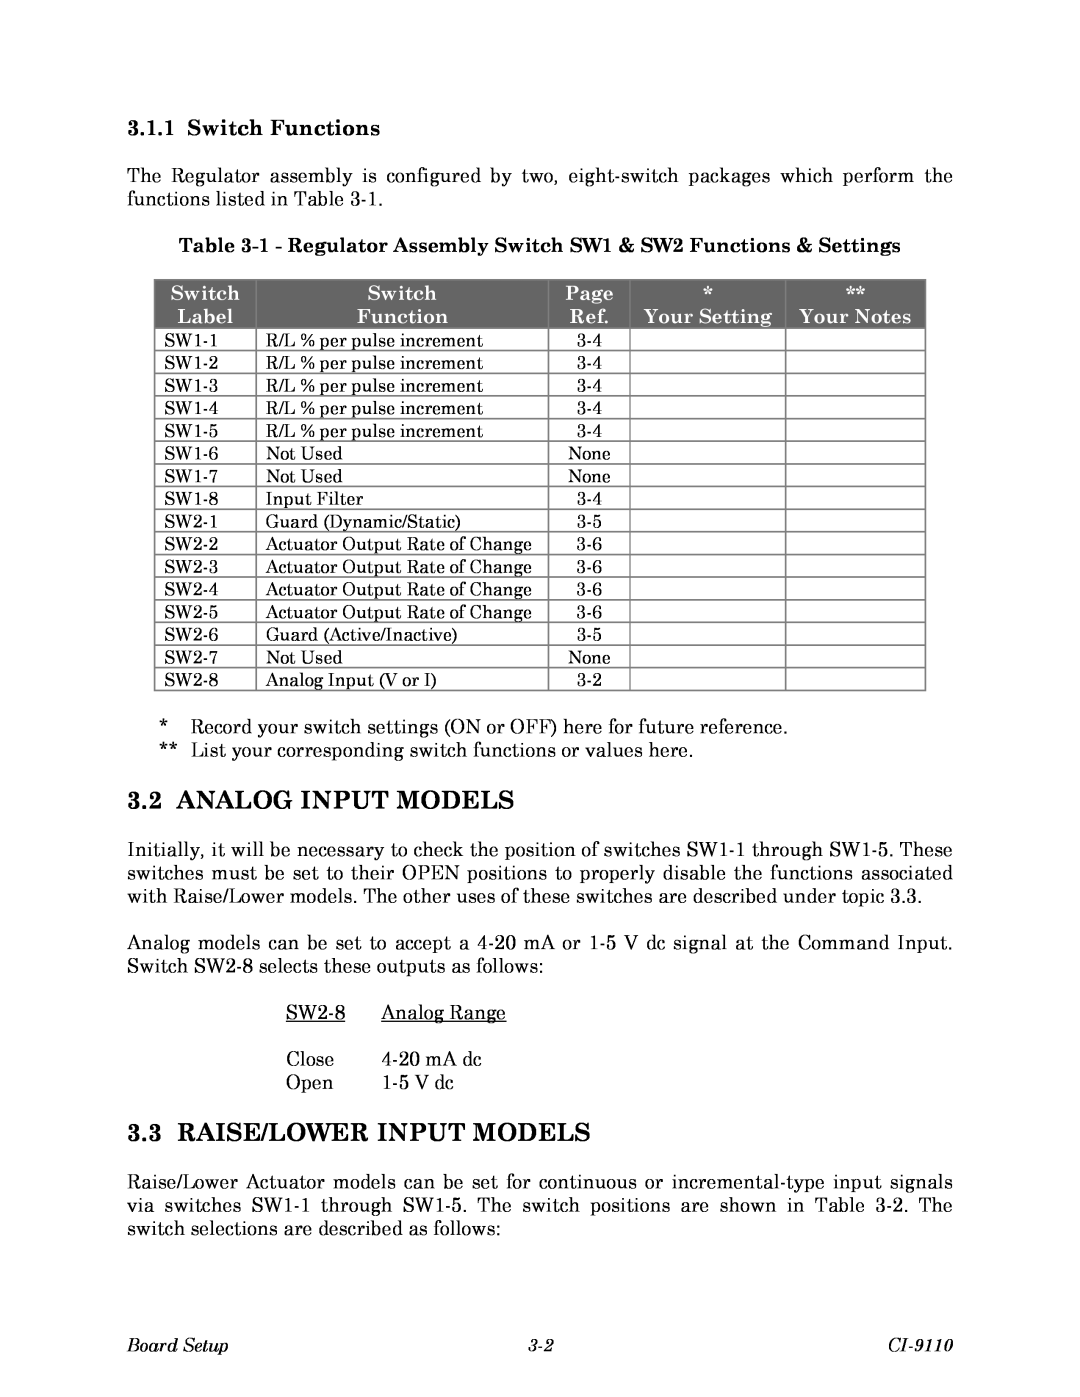 Emerson Process Management 9110-00A, CI-9110 Analog Input Models, Raise/Lower Input Models, Switch Functions, Page, Label 